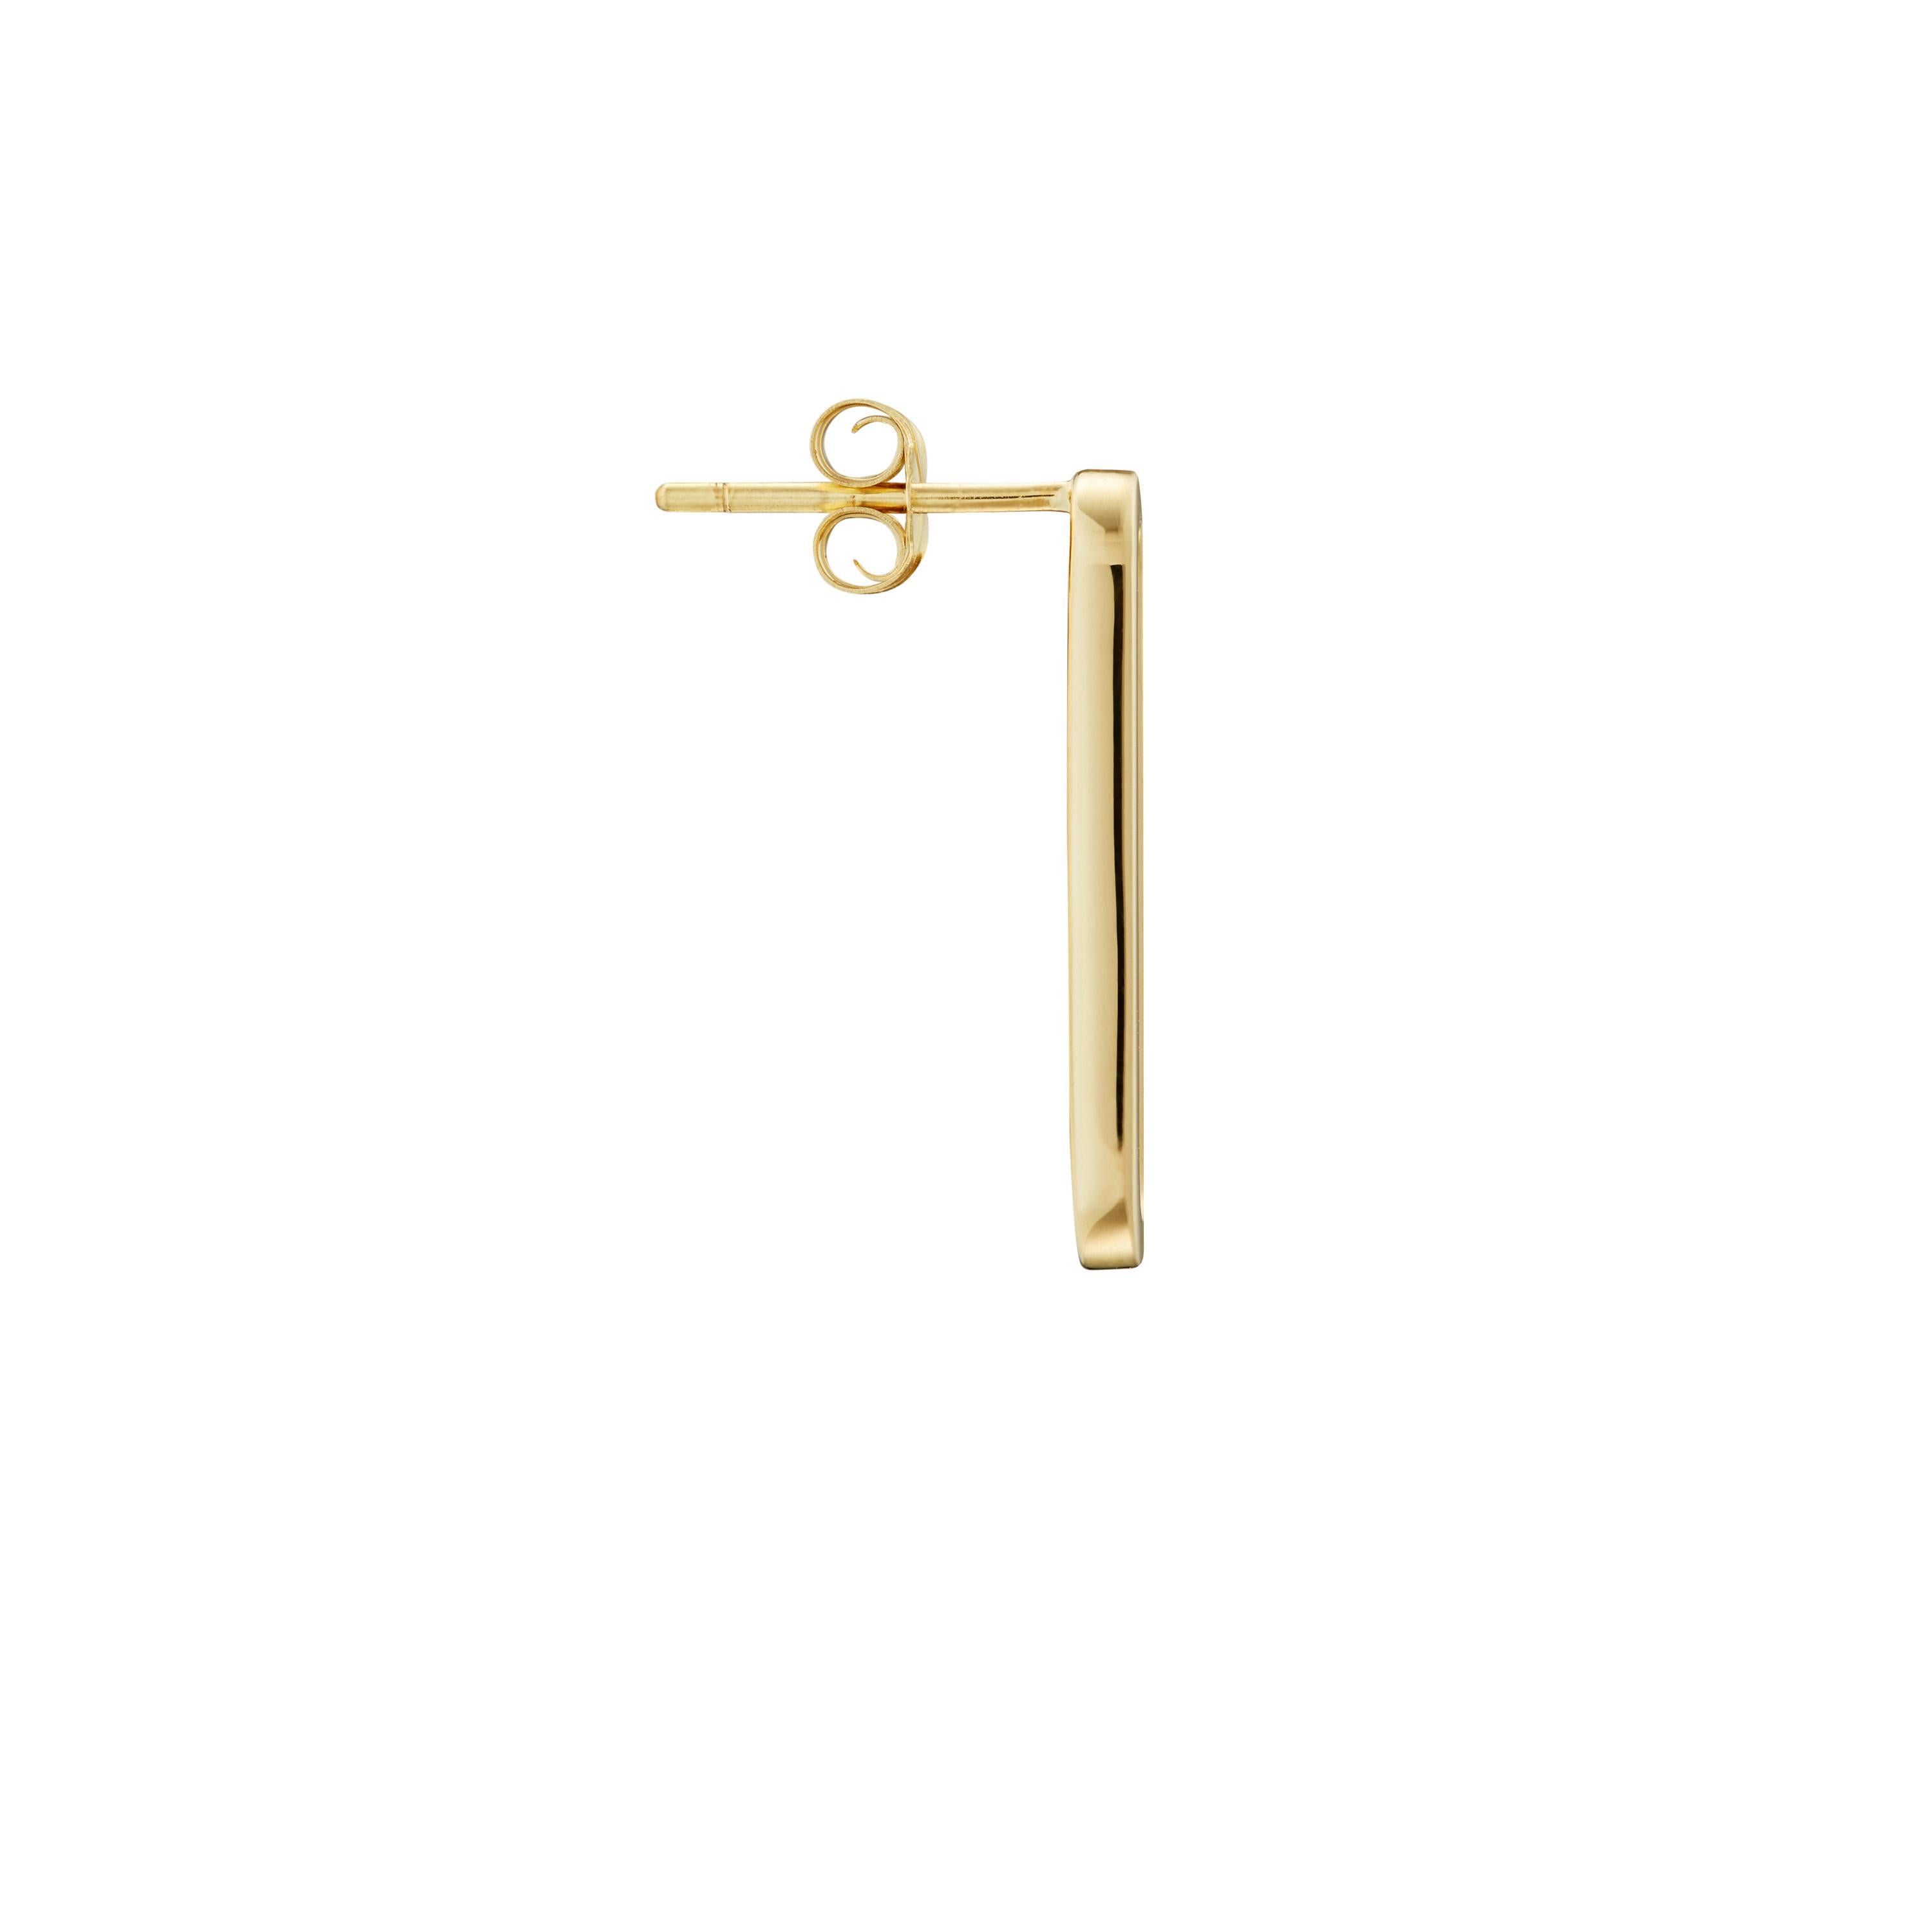 KINRADEN THE SIGH I SMALL Earring - 18k gold (a pair) In New Condition For Sale In København, DK